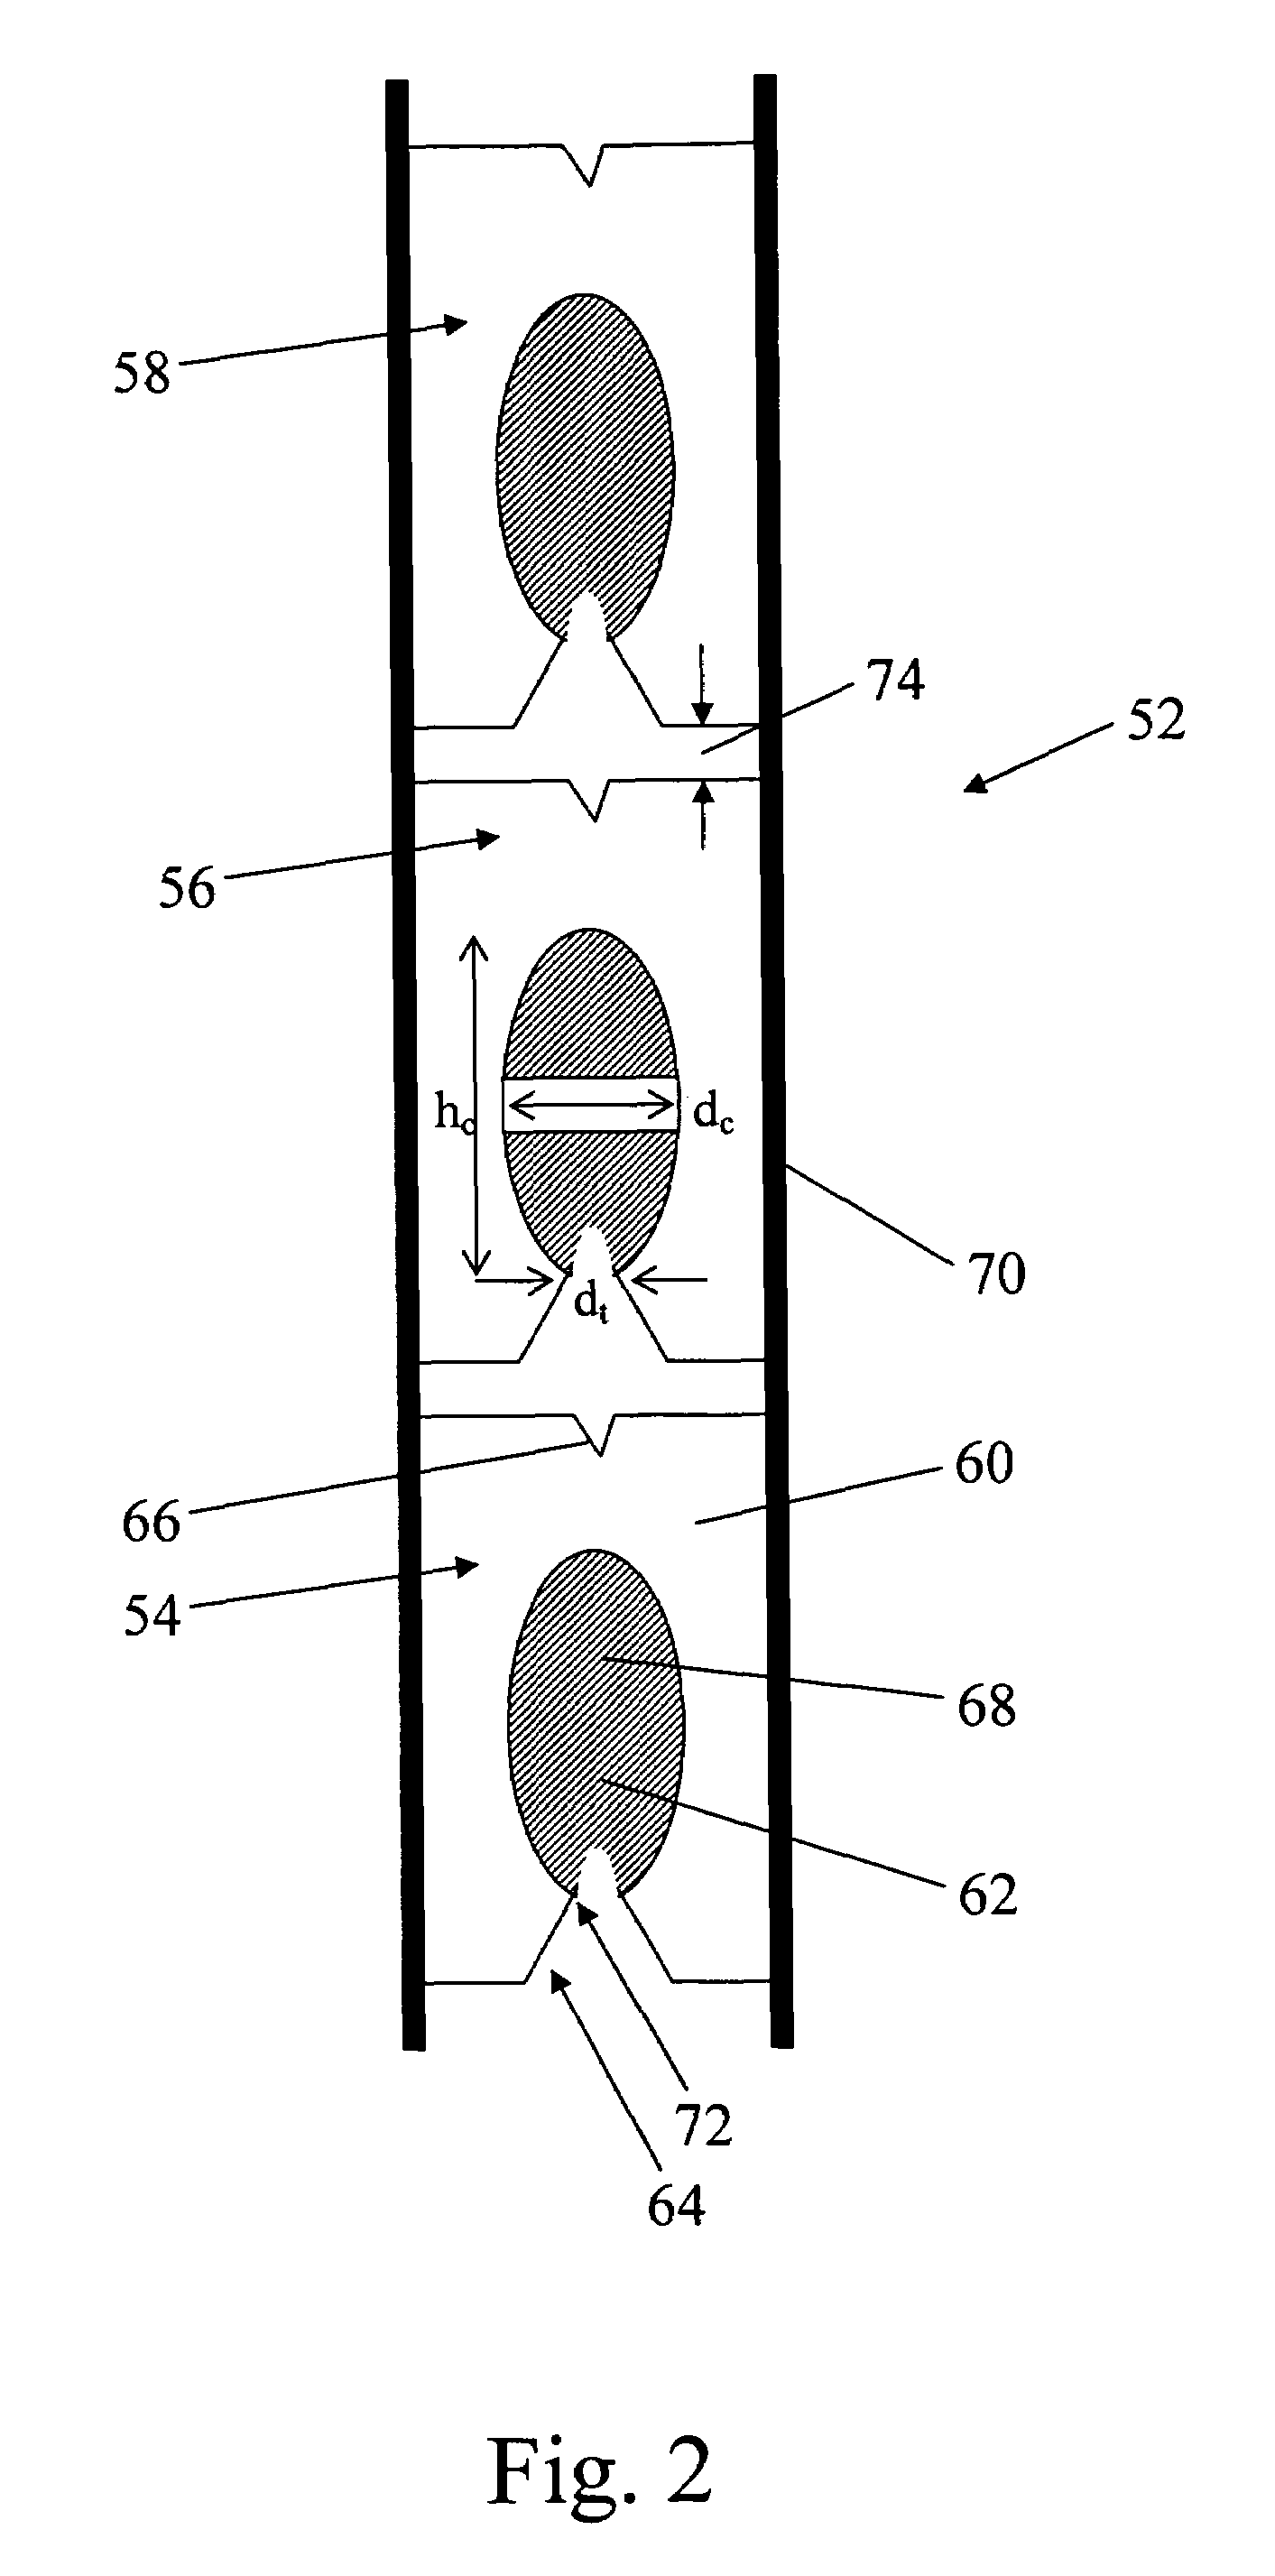 Simple solid propellant rocket engine and super-staged rocket